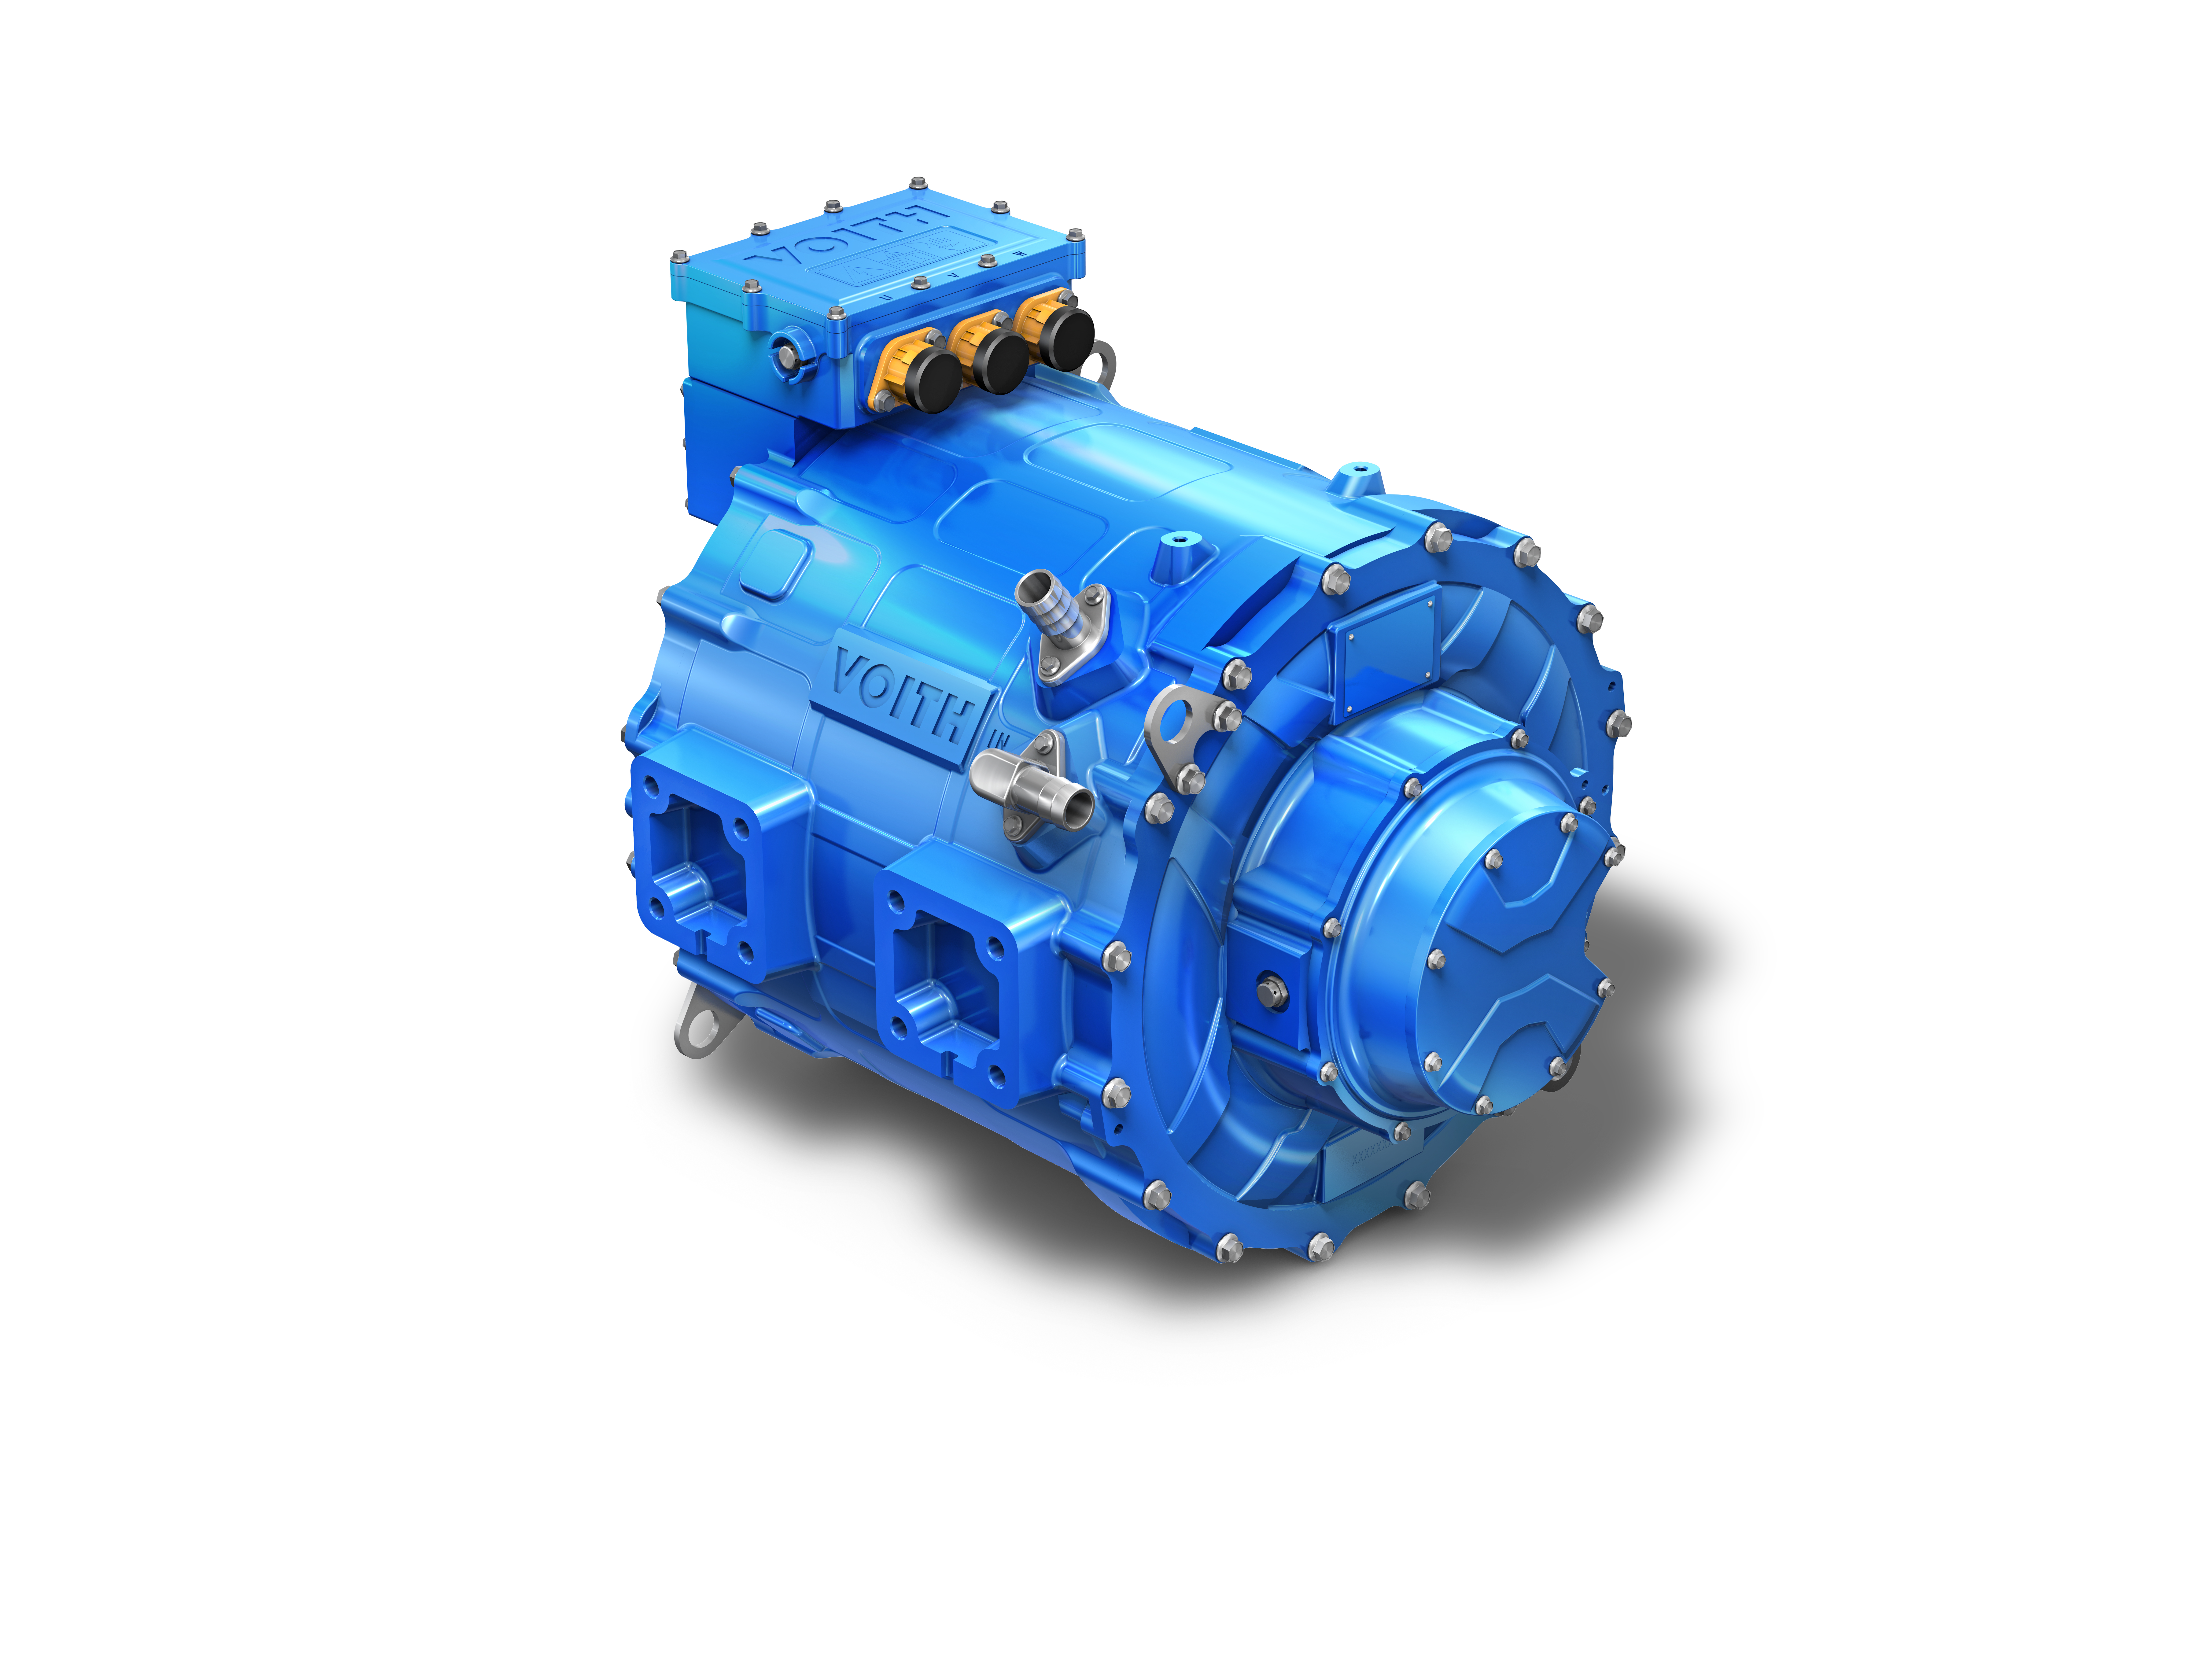 MD motor of Voith Electrical Drive System (VEDS) with 230 kW continuous power and 250 kW peak power.